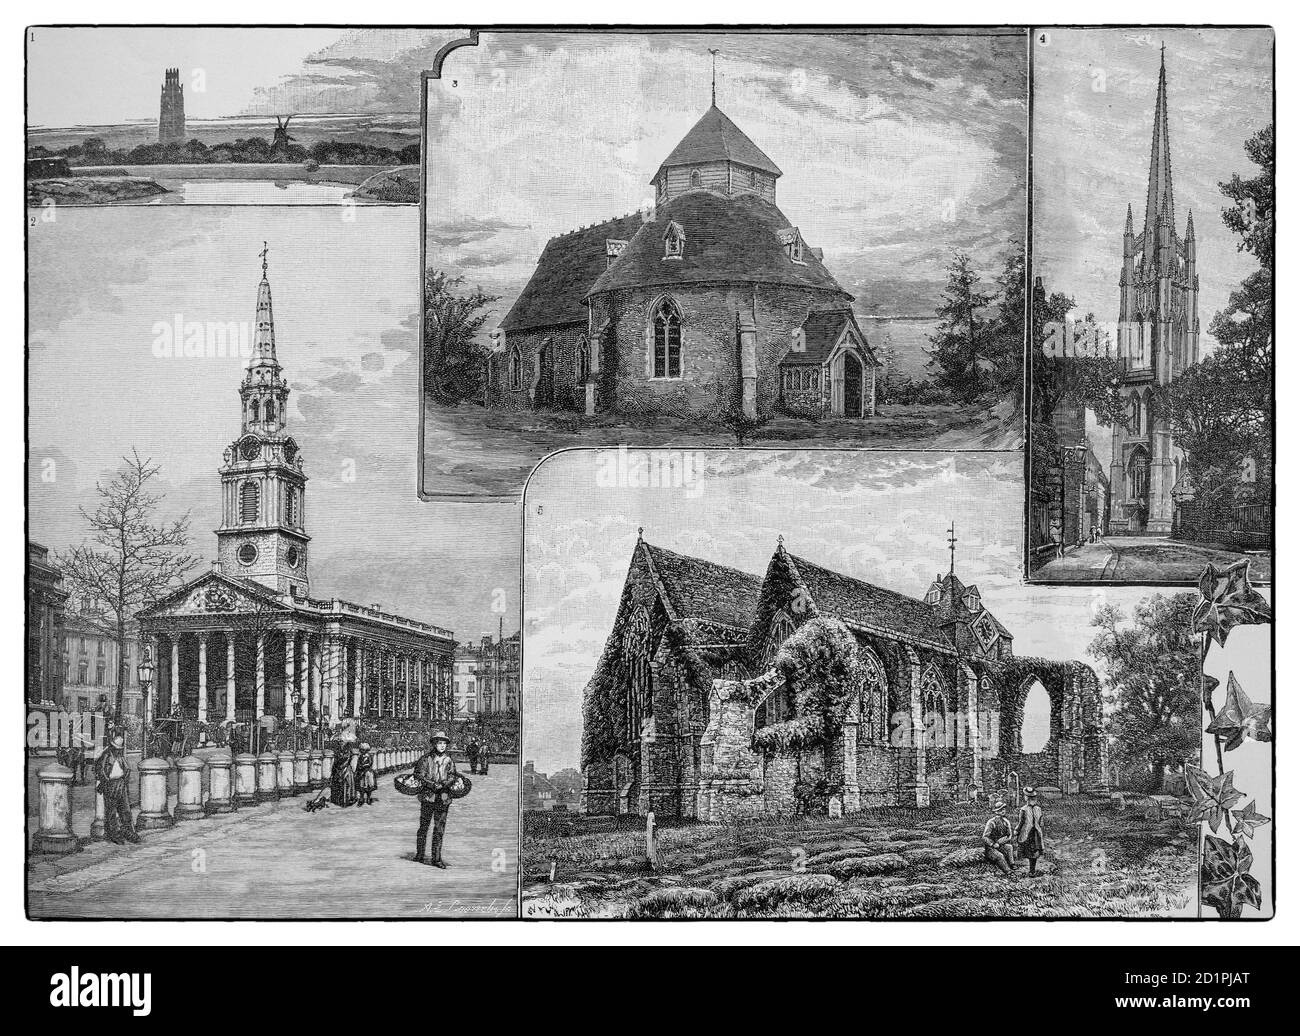 A 19th Century collage of British Churches,  1. Boston Stump, Lincolnshire: 2. St Martin-in-the-fields, London: 3. Little Maplestead, Essex: 4. Louth, Lincolnshire 5. Winchelsea, East Sussex. Stock Photo